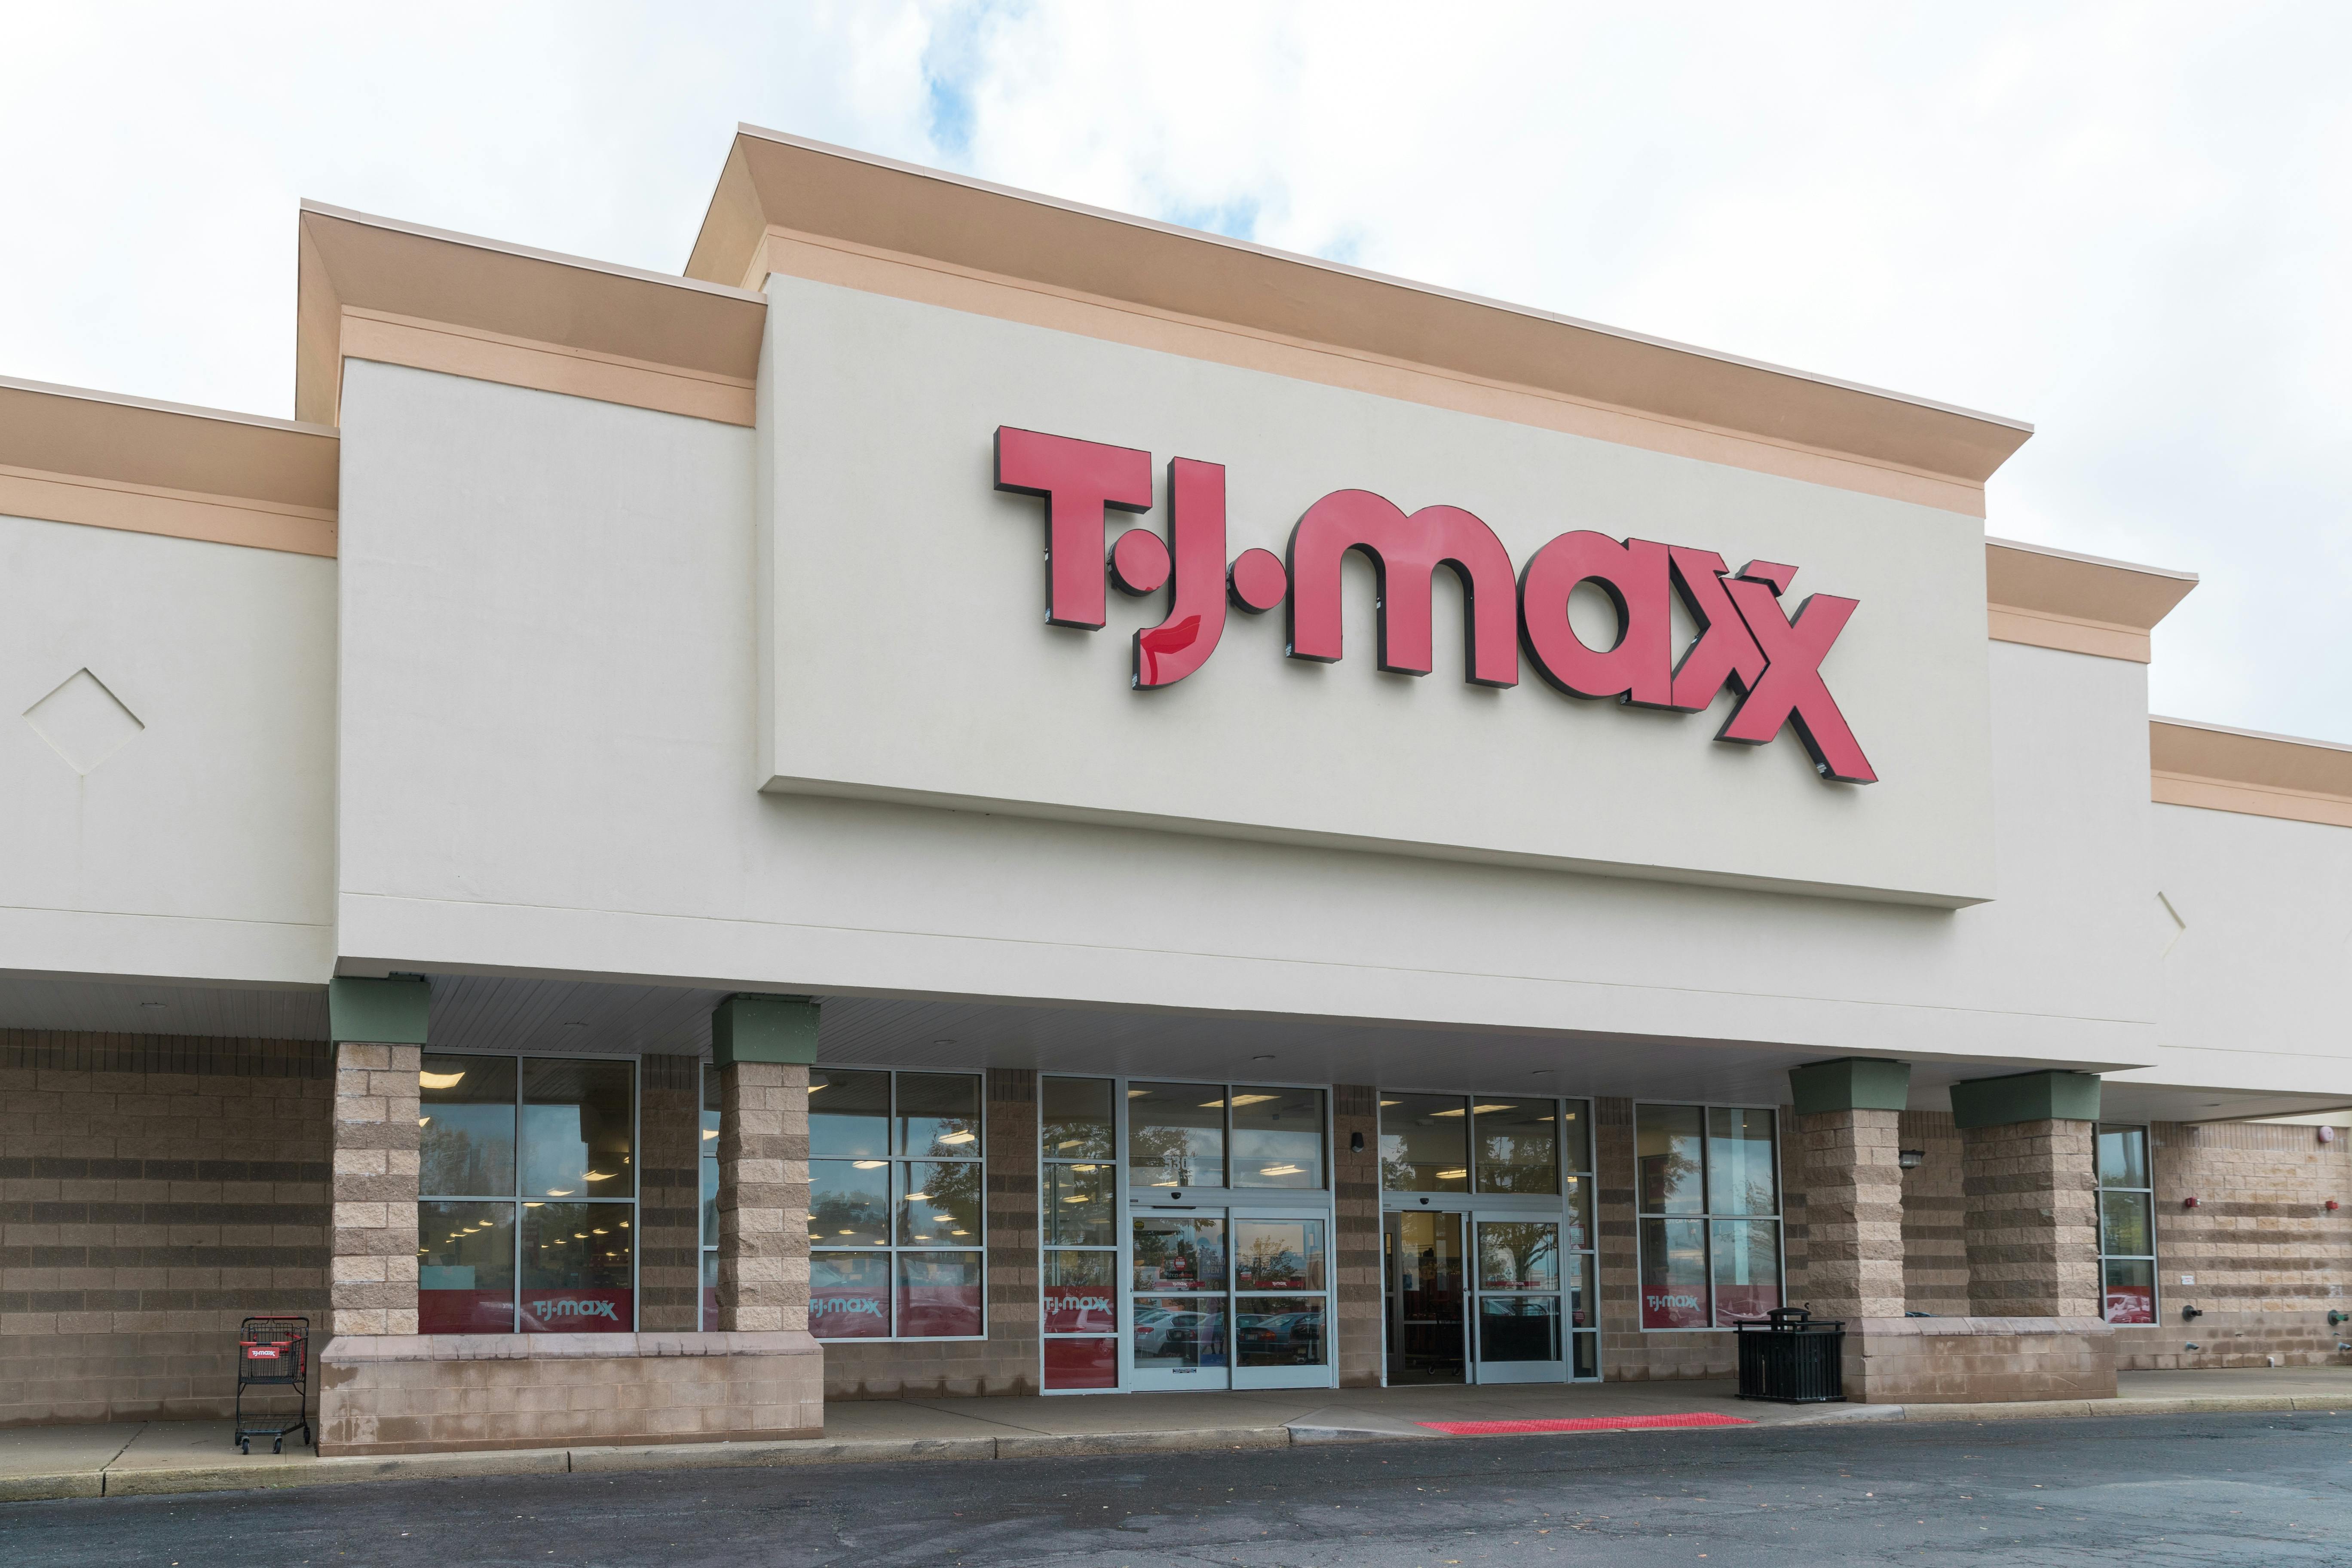 an outside view of a T.J. Maxx store from the parking lot